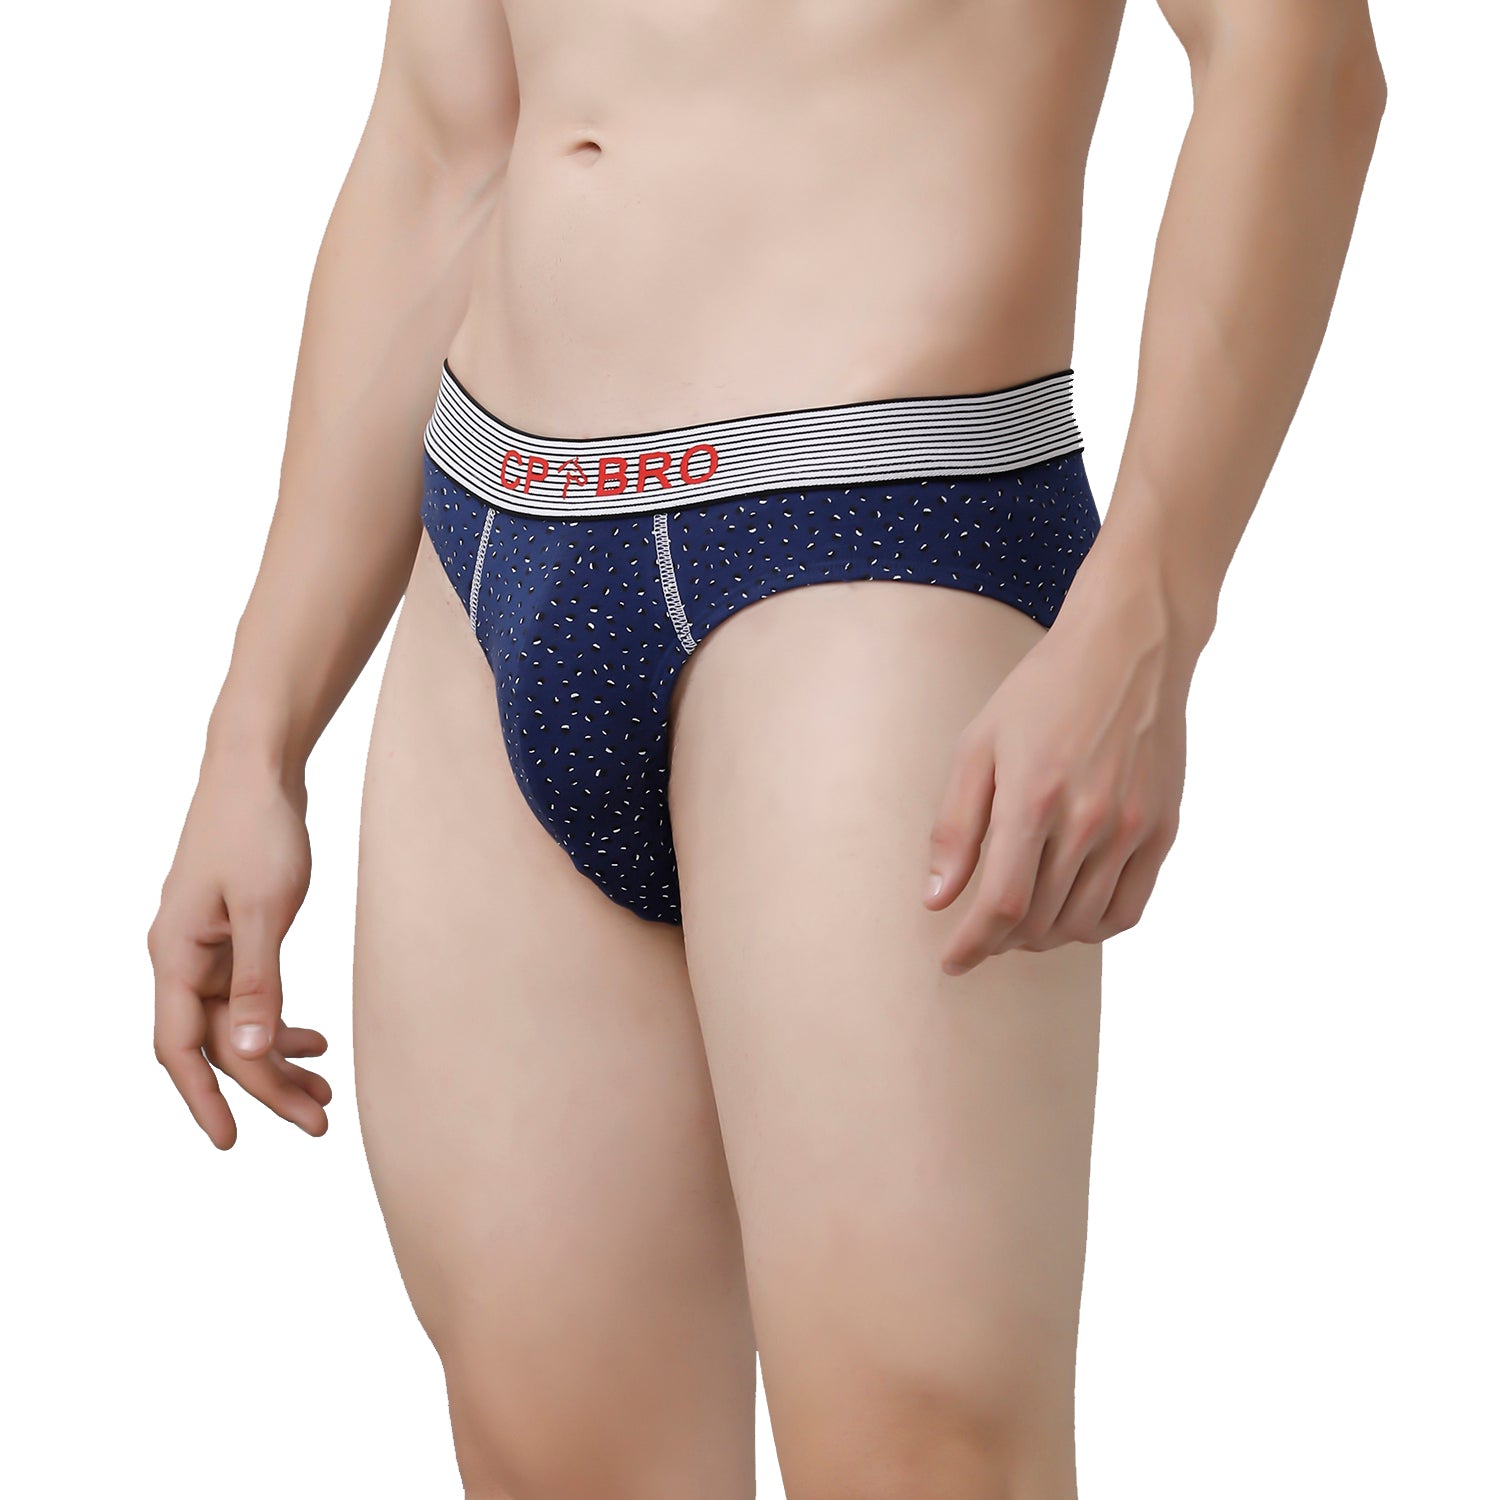 CP BRO Men's Printed Briefs with Exposed Waistband Value Pack - Navy Dot & Blue Leaf (Pack of 2)